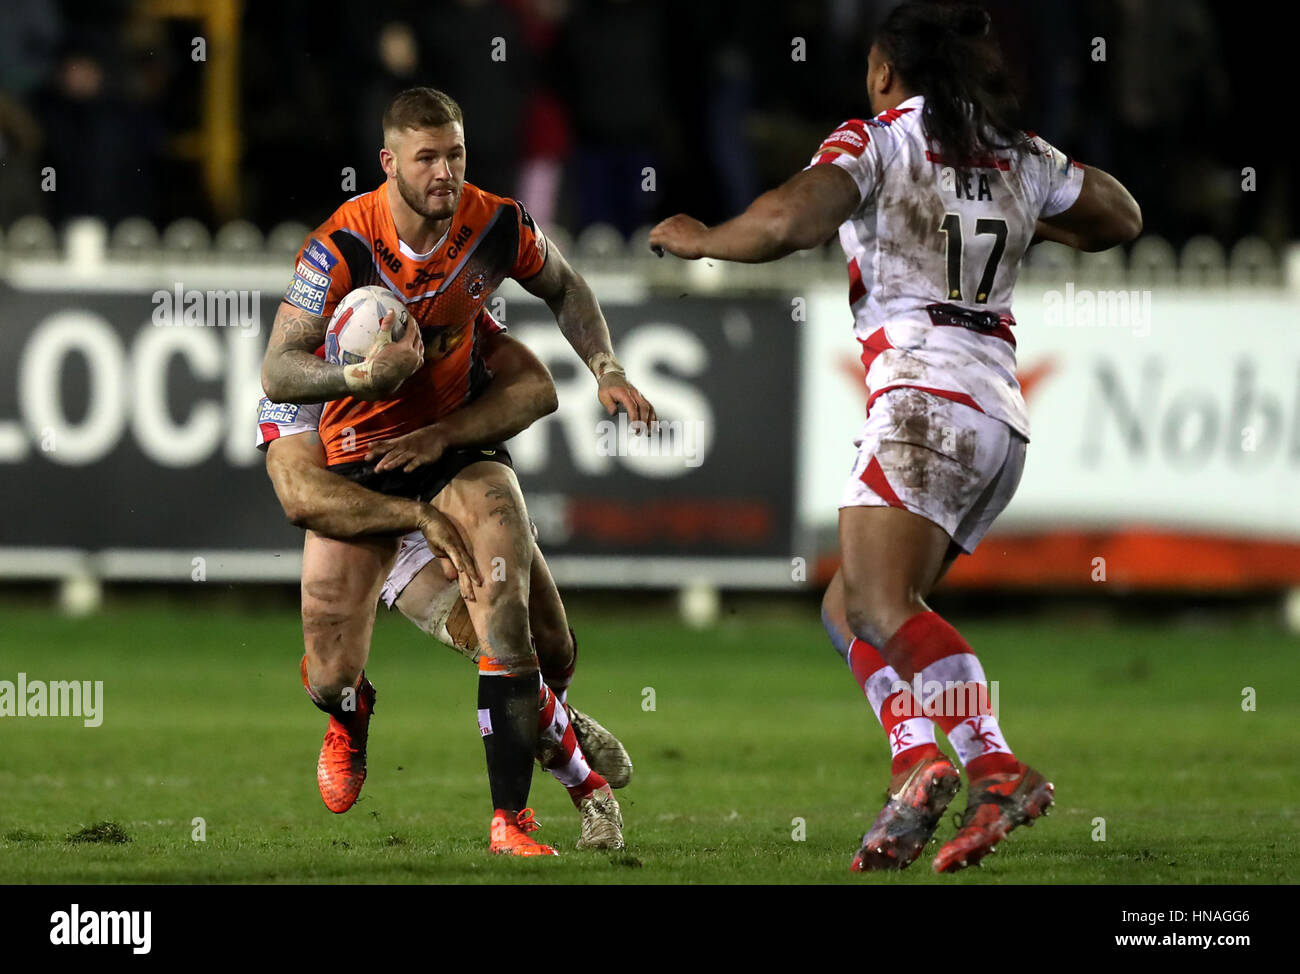 Castleford Tigers' Zak Hardaker tries to break free from the Leigh Centurions' defence during the Super League match at the Mend-A-Hose Jungle, Castleford. Stock Photo